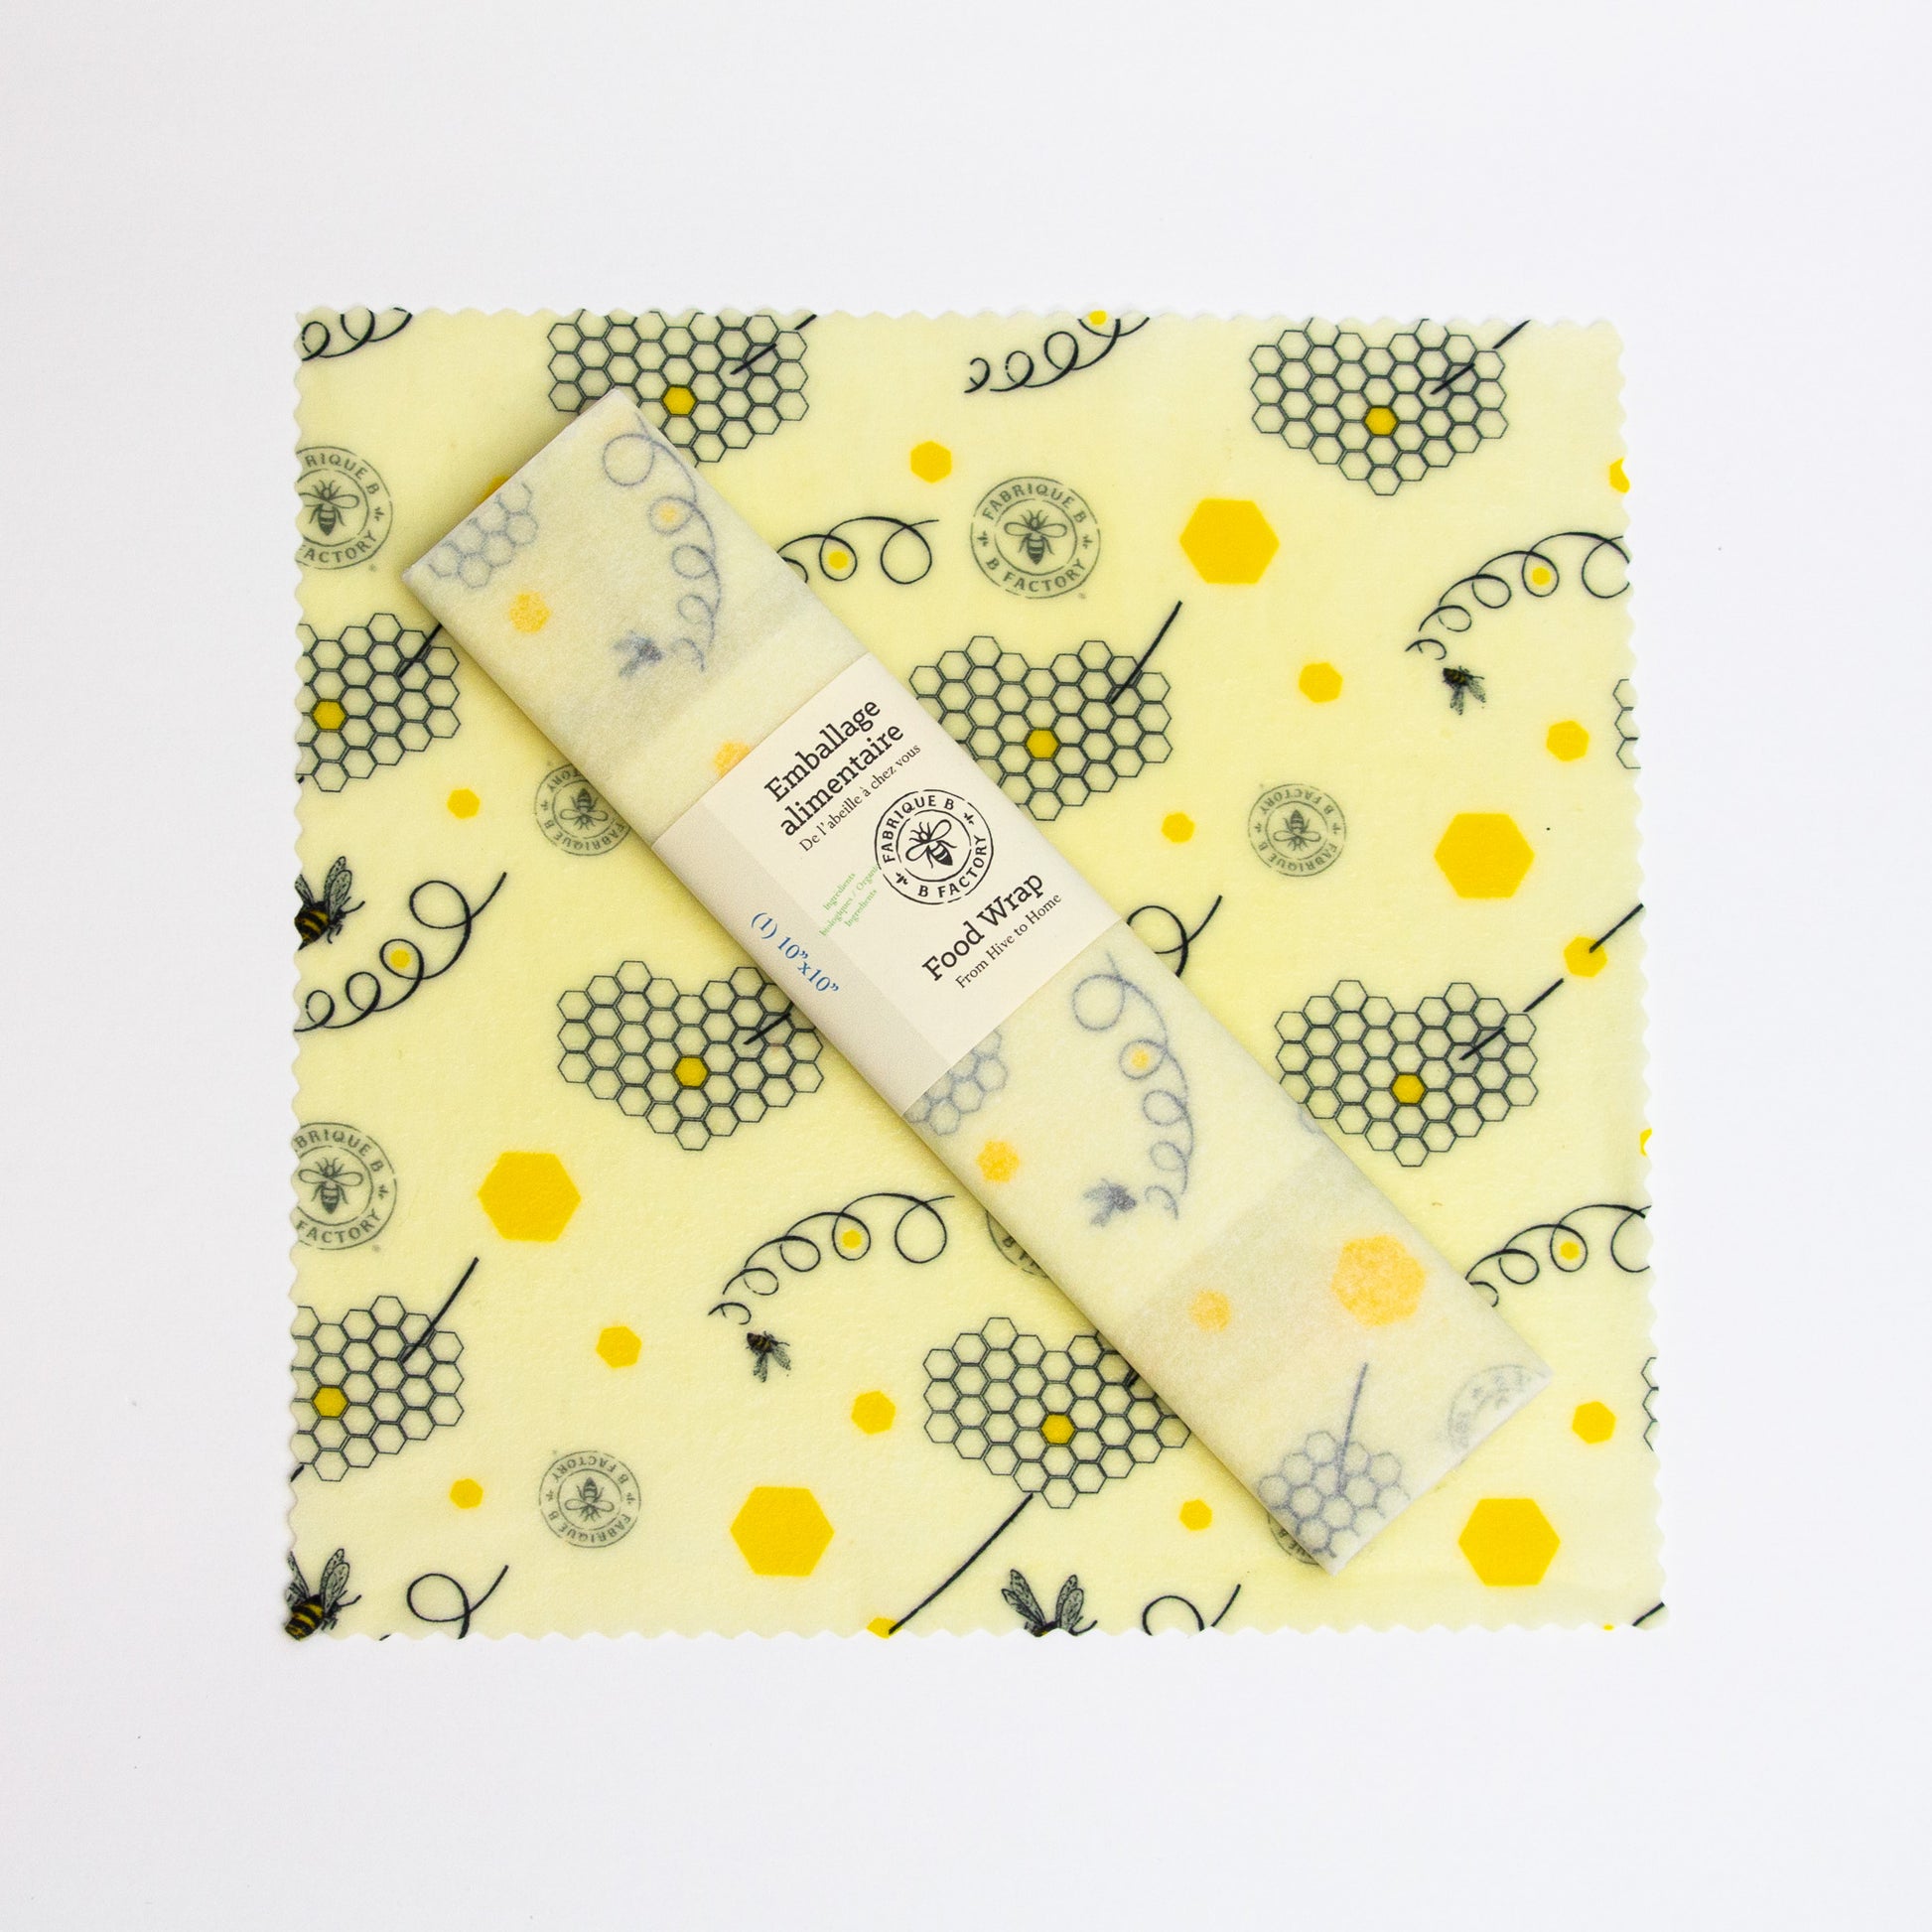 A 10-inch square patterned beeswax food wrap with honeycomb and bee design and a wrapped beeswax wrap sitting on top with B Factory logo